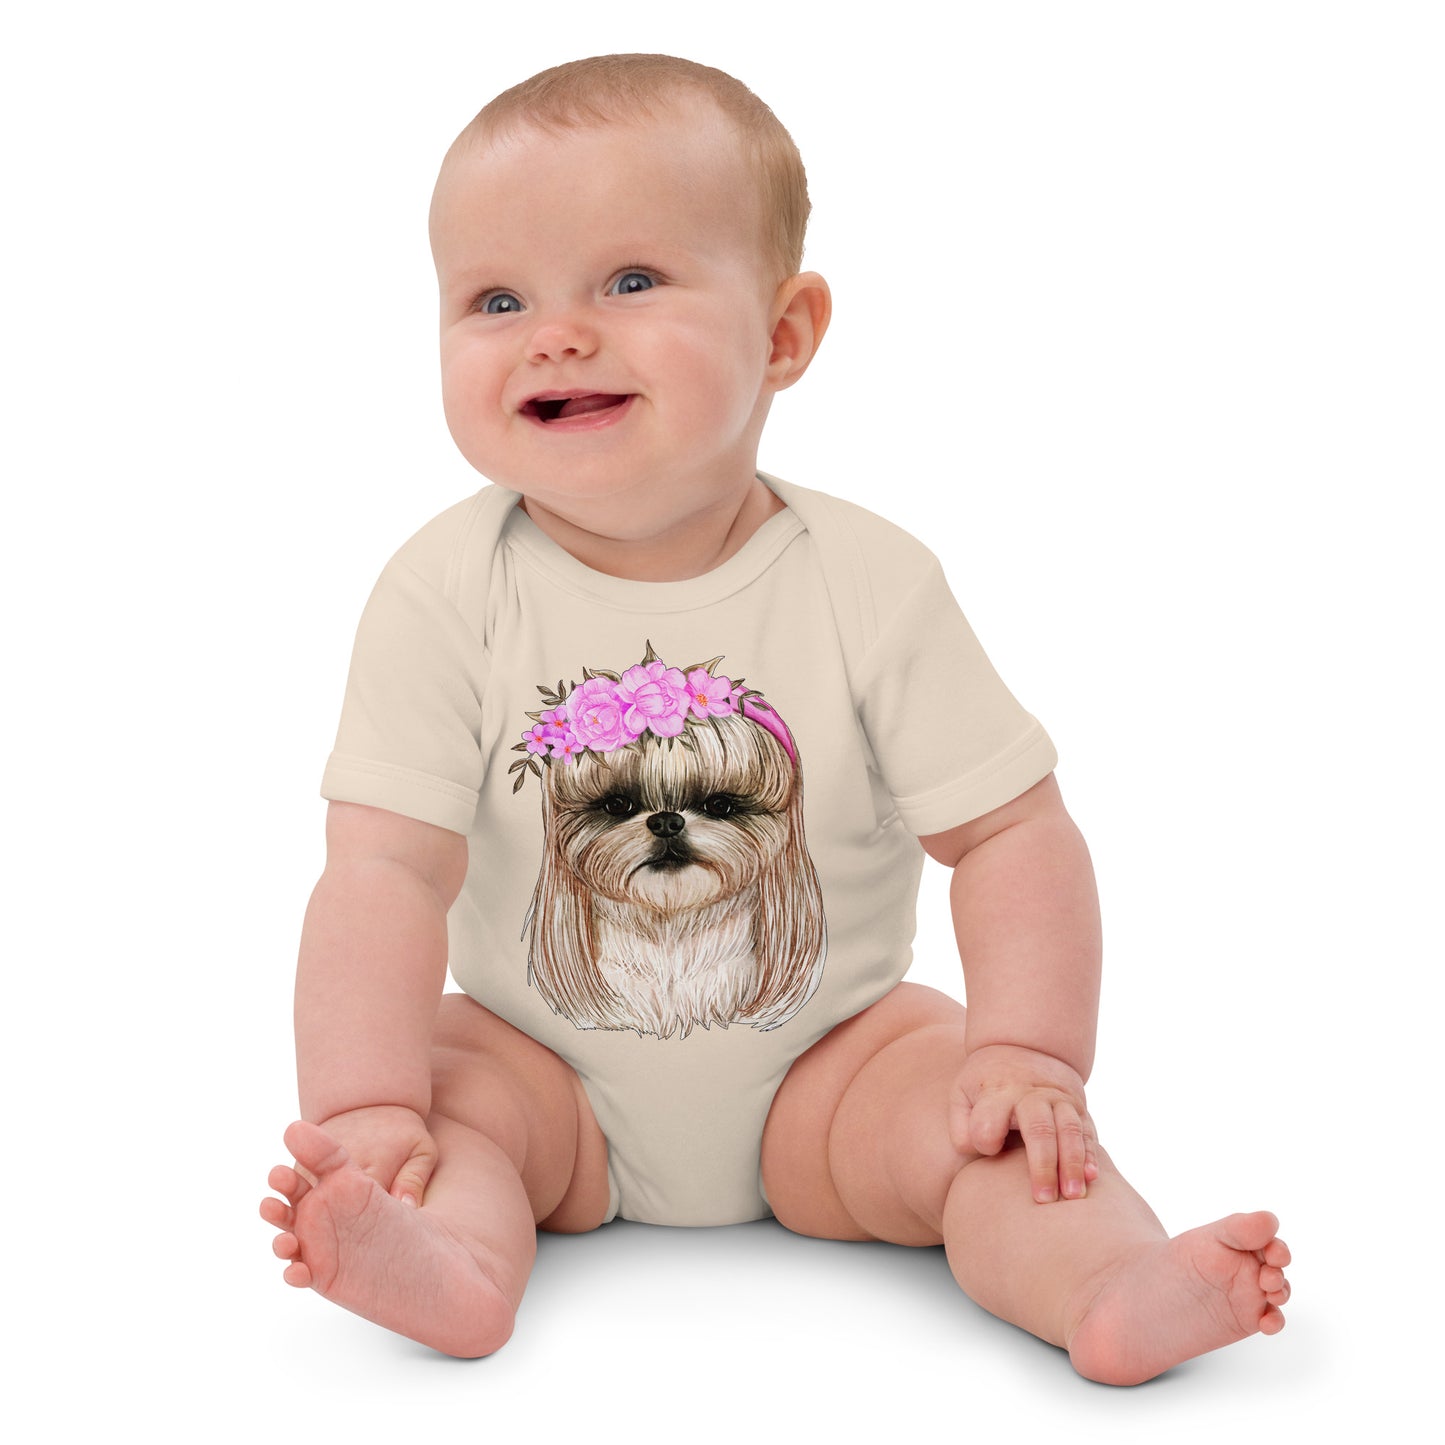 Adorable Dog with Flower Hair Crowns Bodysuit, No. 0562